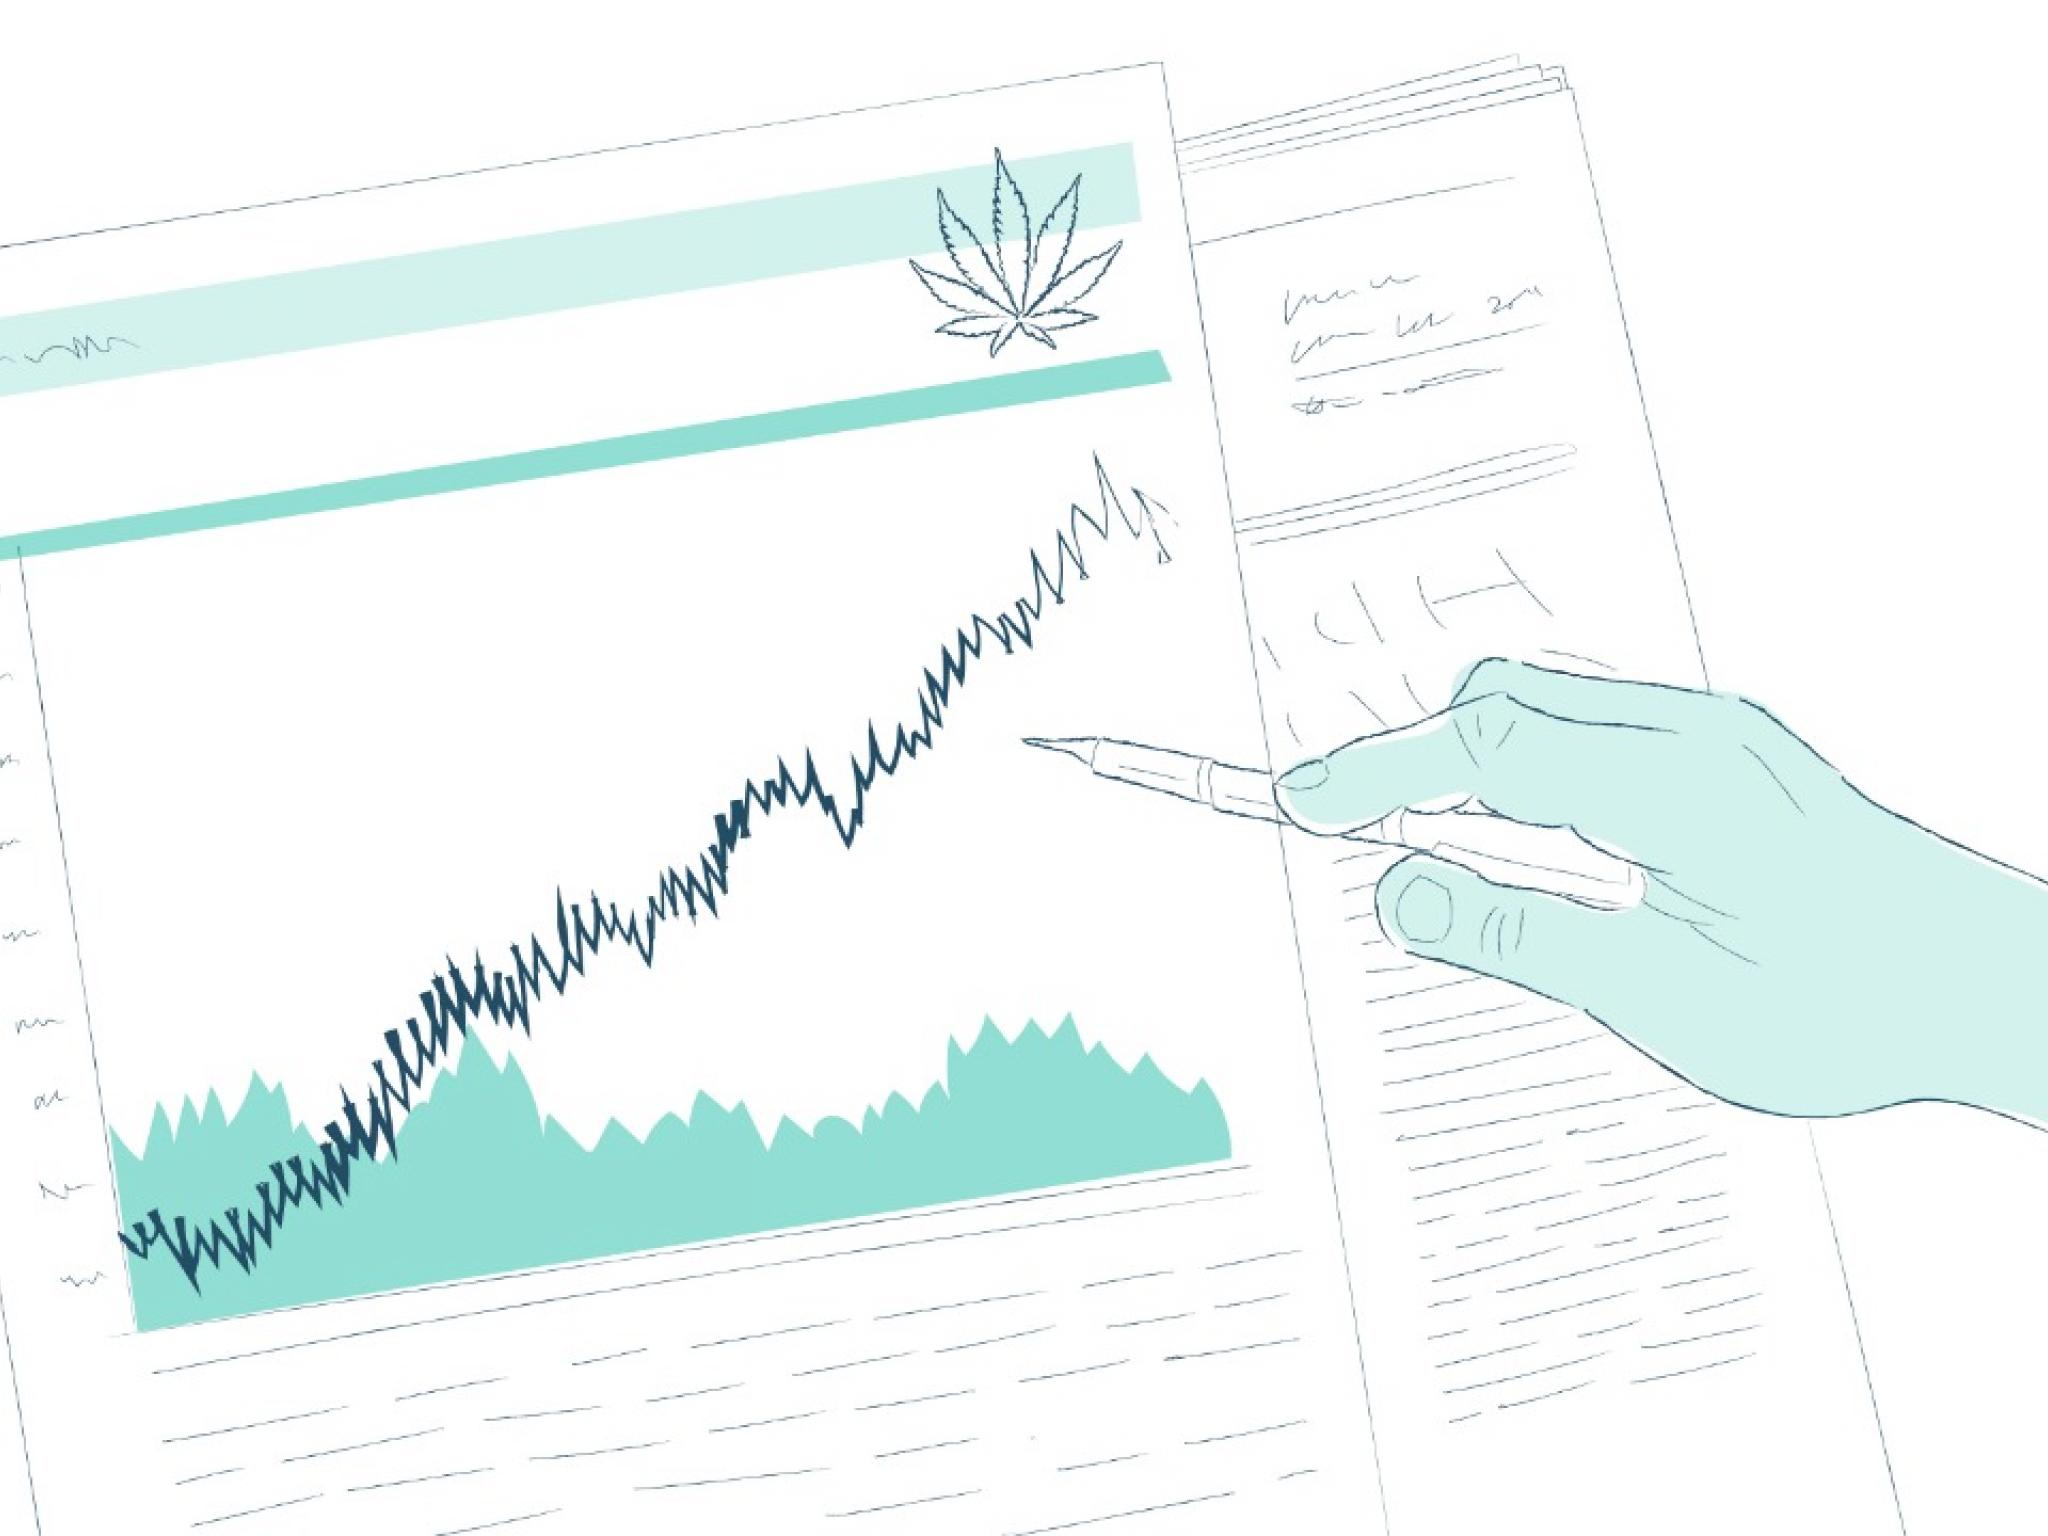  cannabis-stock-gainers-and-losers-from-march-5-2020 